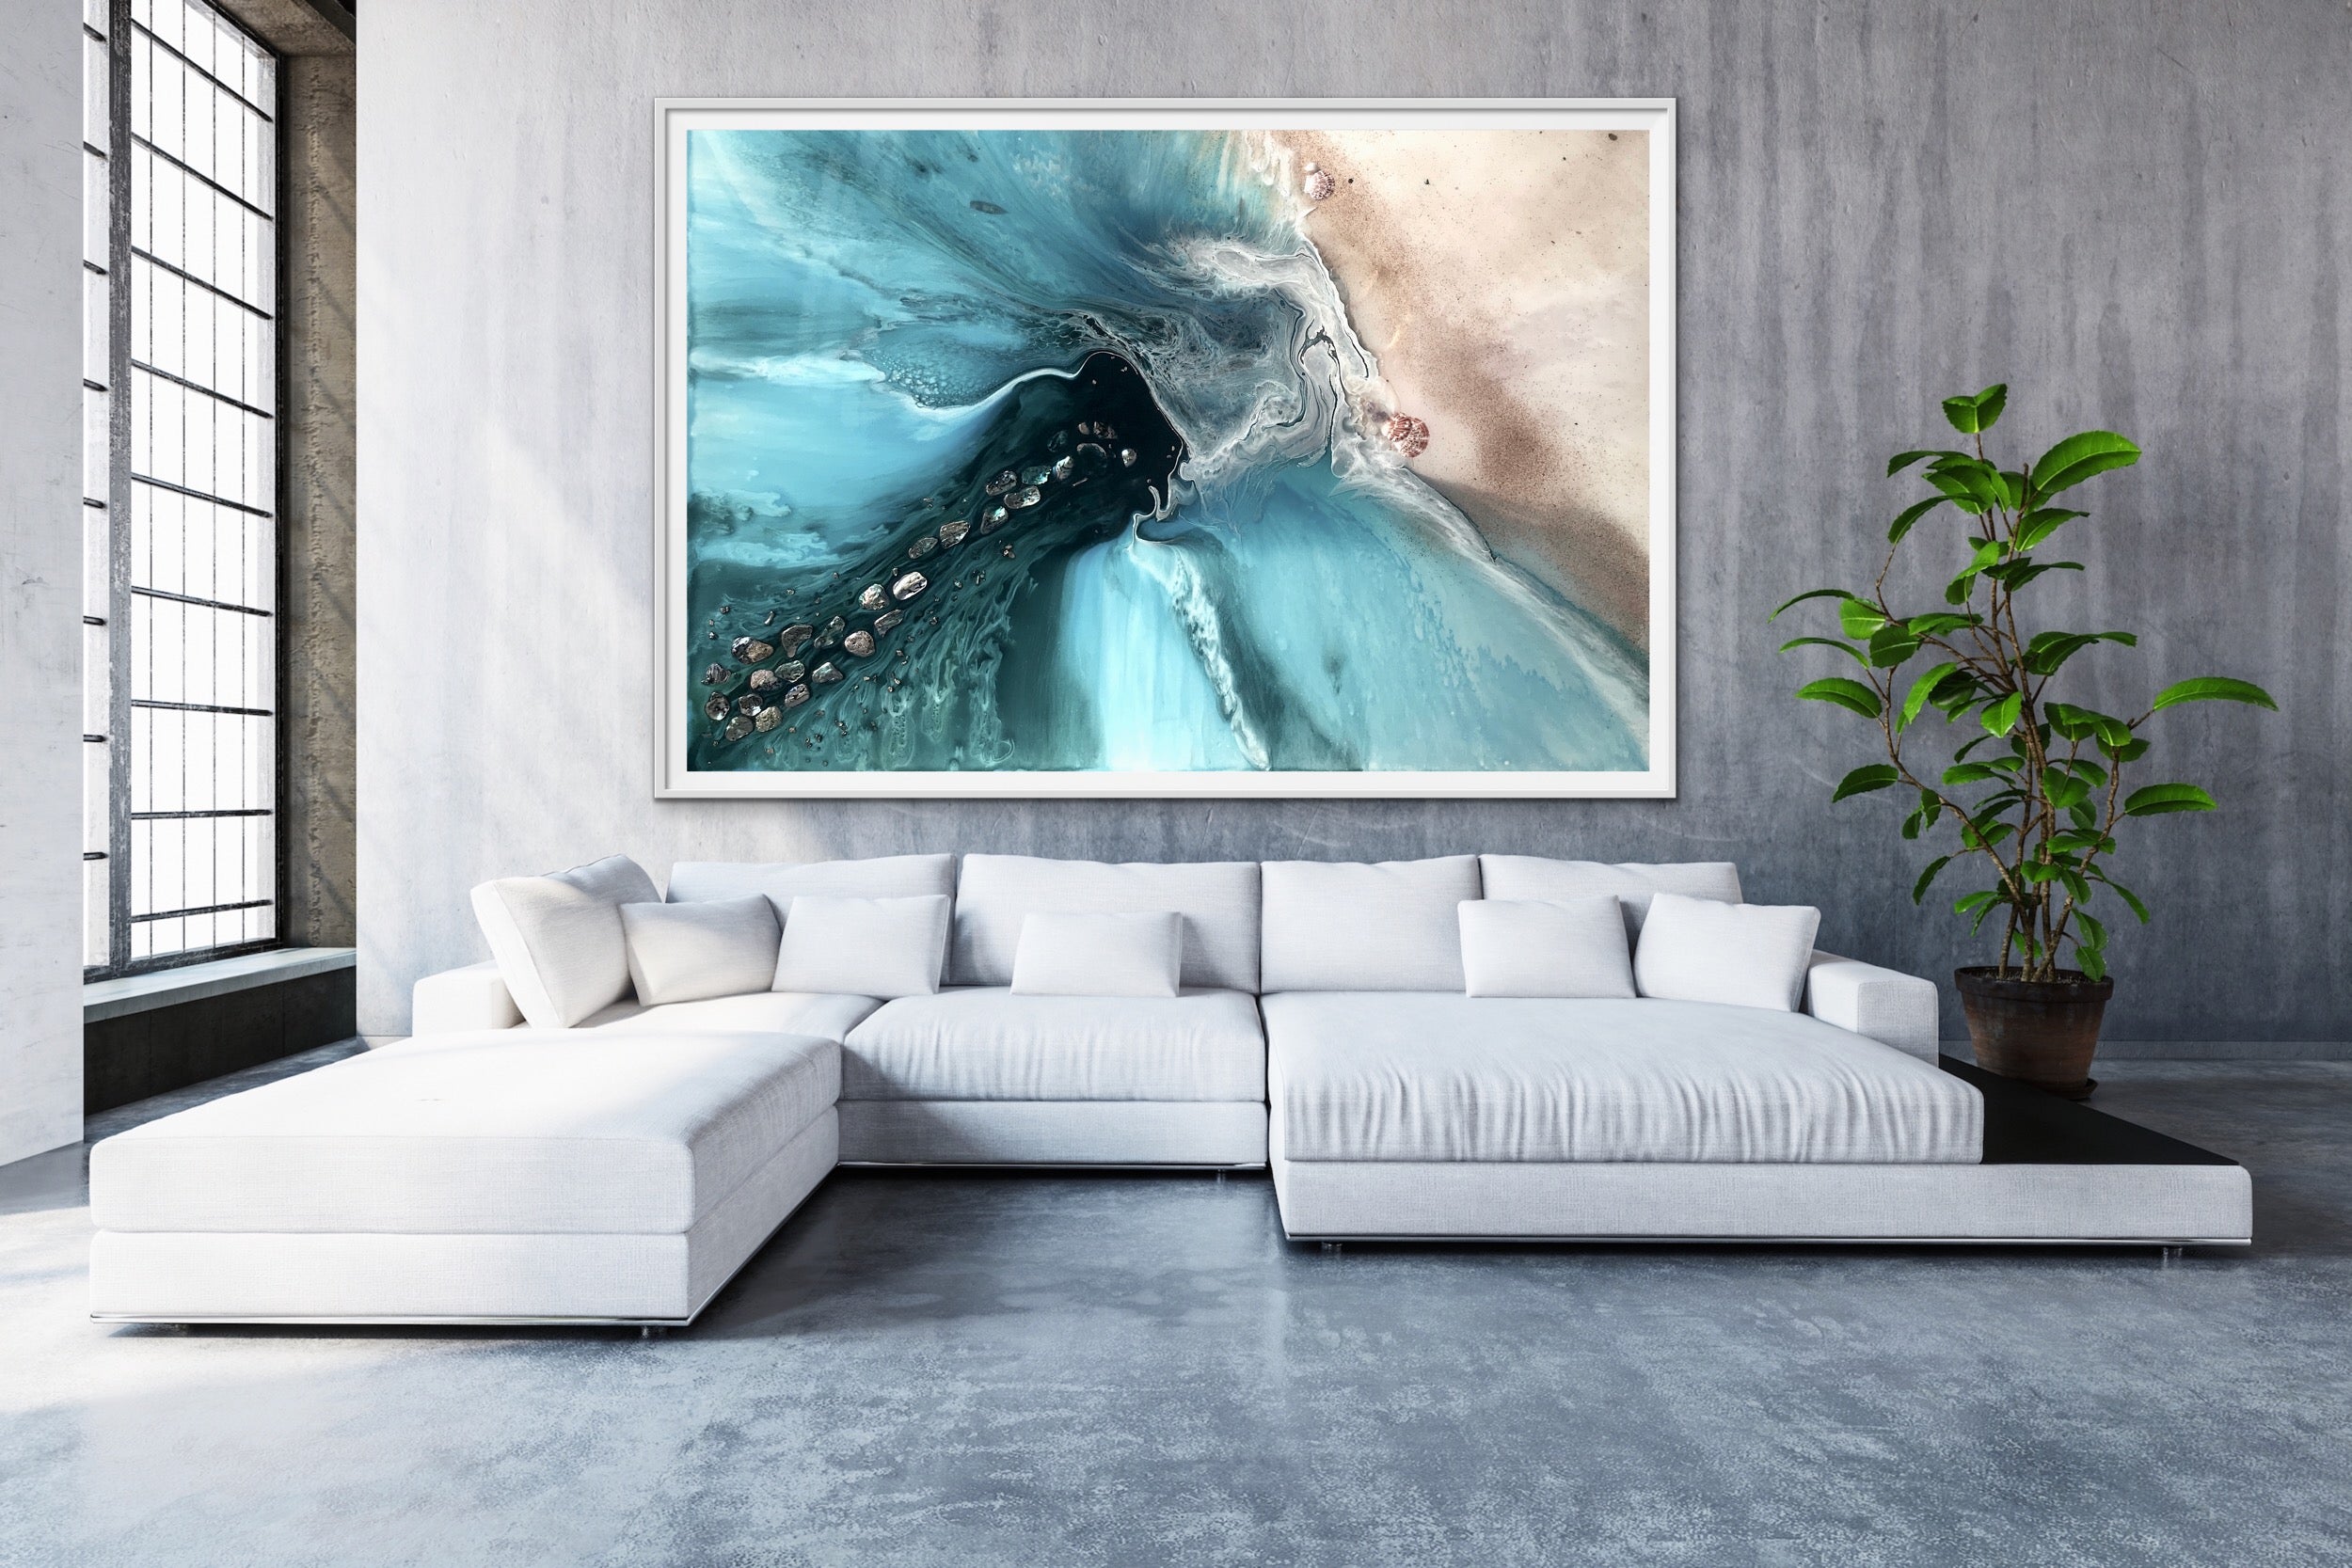 Abstract Sea. Muted Teal. Rise Above 4 Neutral. Art print. Antuanelle 5 Ocean Seascape. Limited Edition Print